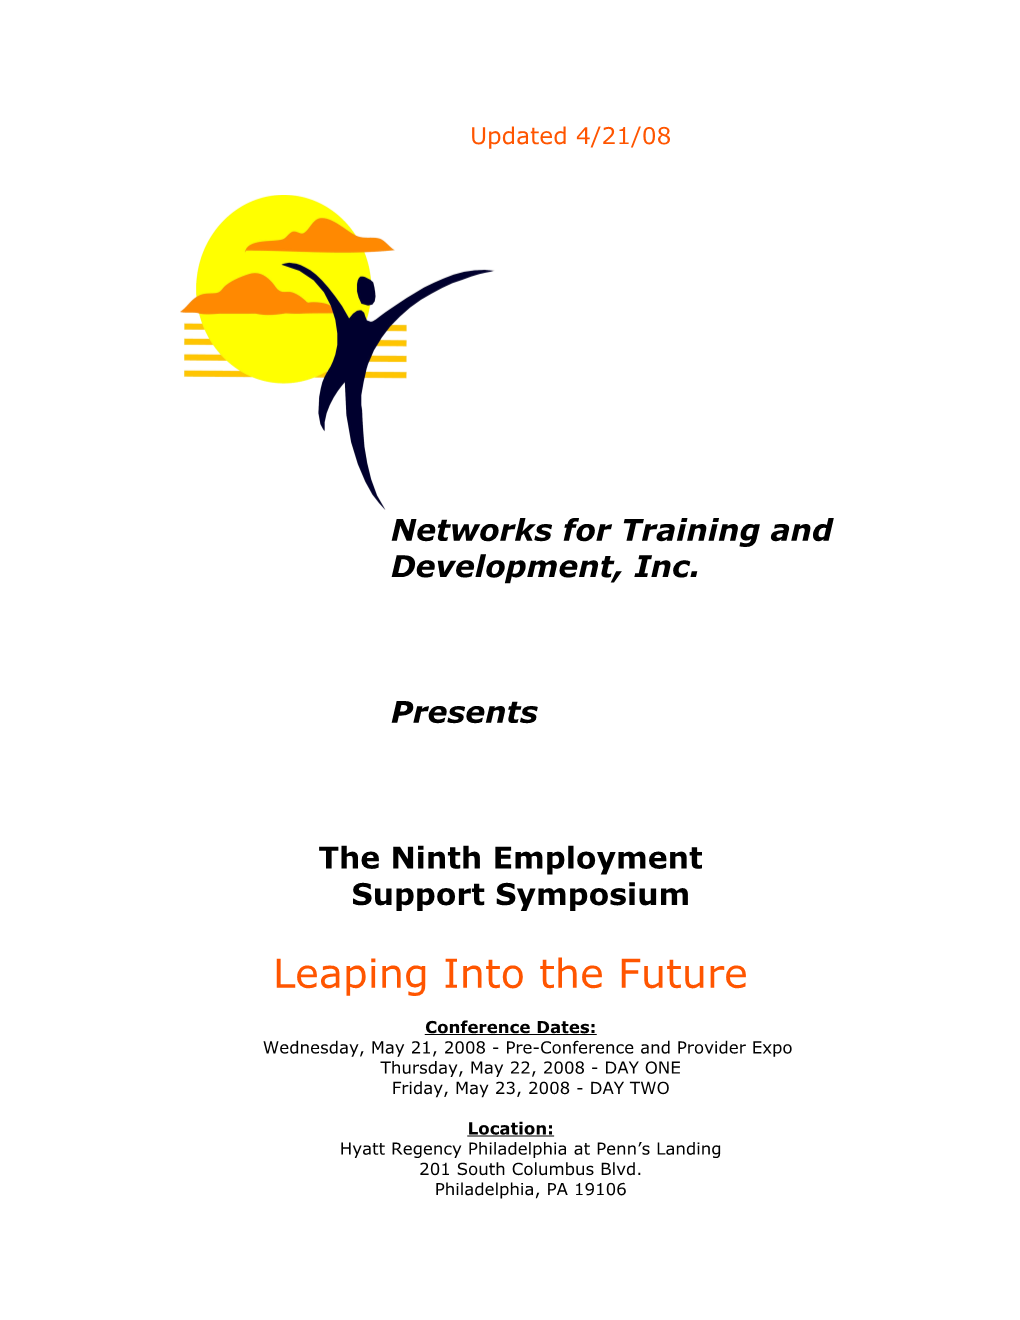 The Ninth Employment Support Symposium